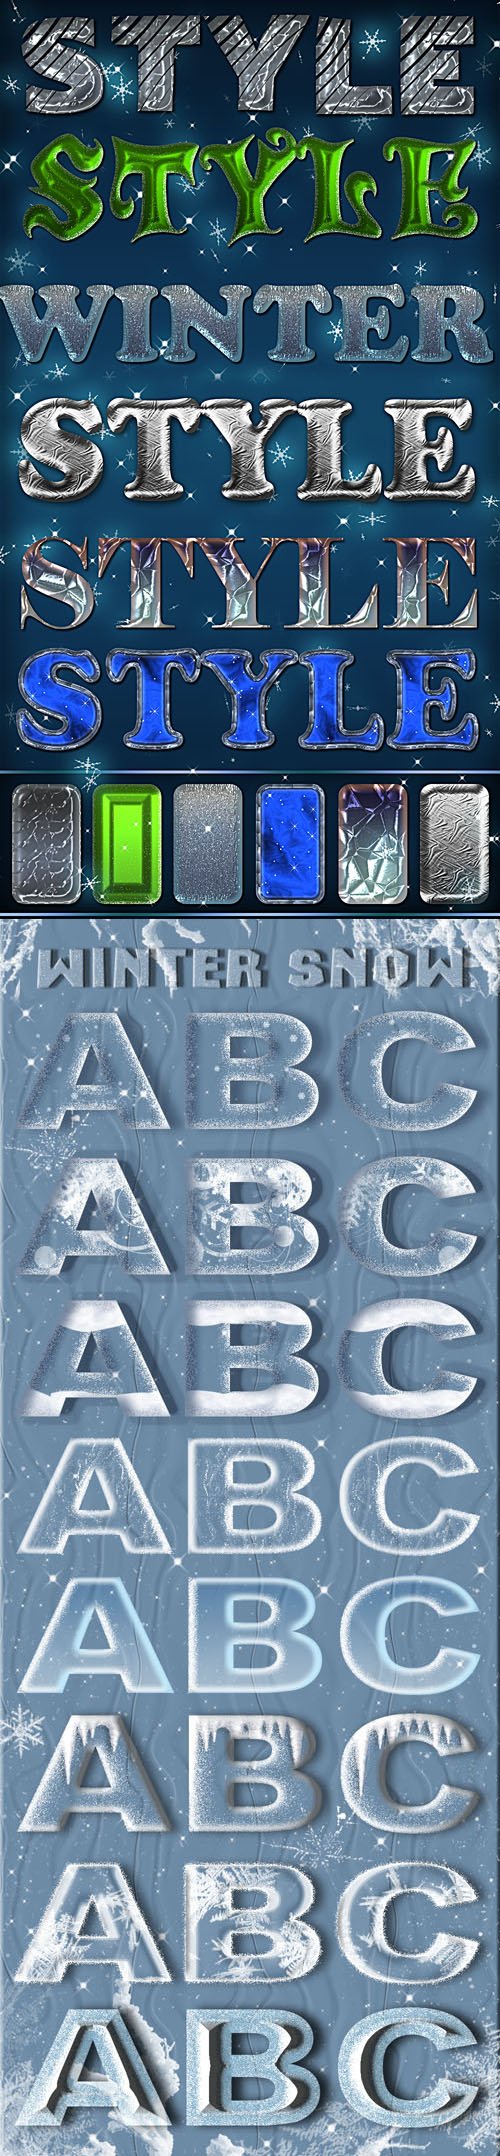 20+ Winter & Snow 3D Text Effects - Photoshop Styles